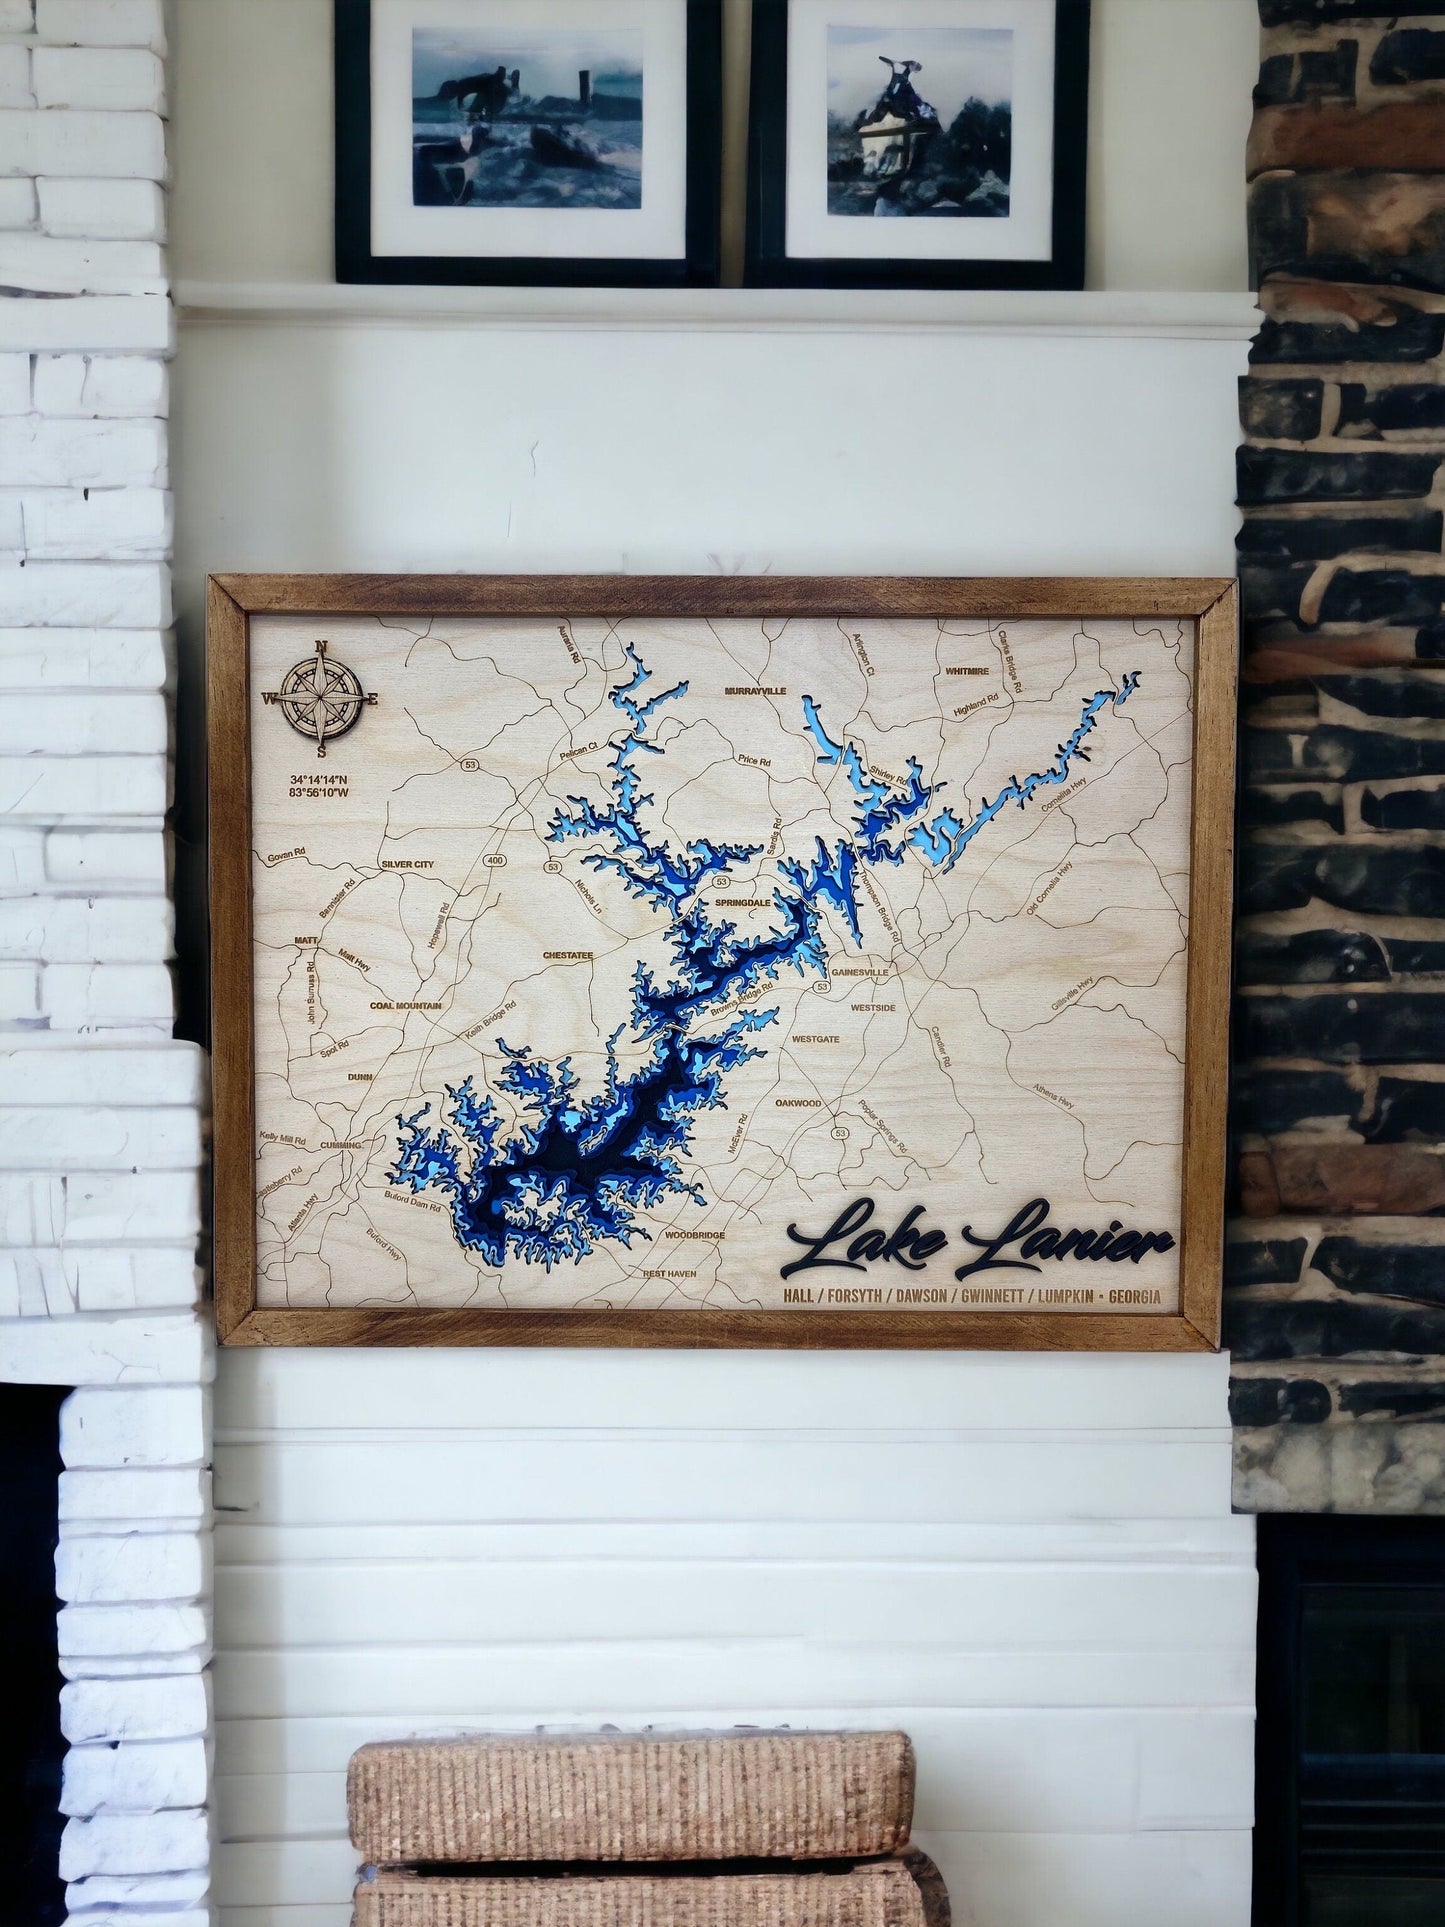 Lake Oconee 3D Framed Picture Map, Wooden Engraved Map